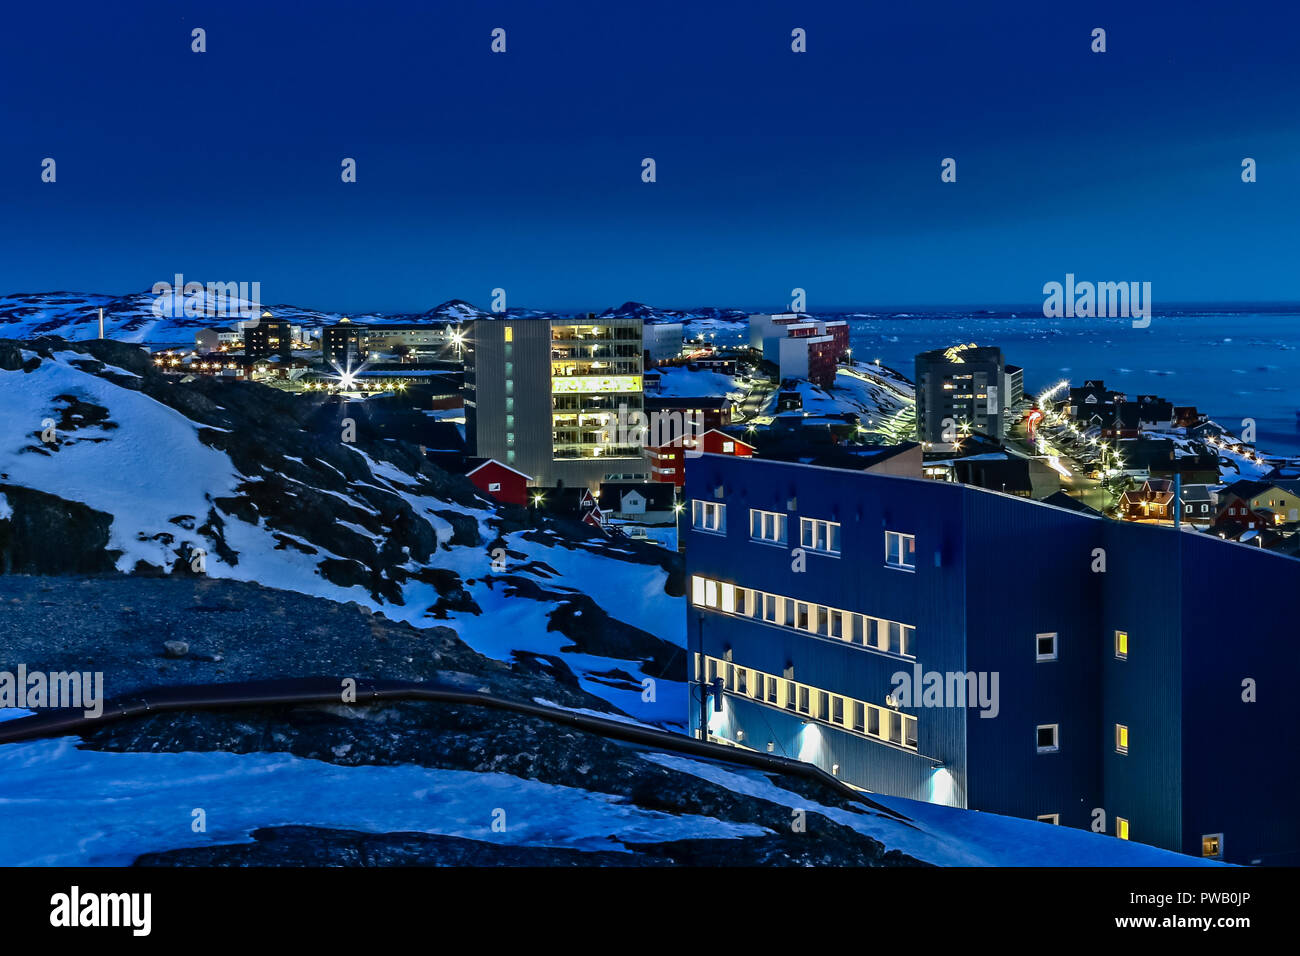 Night downtown streets and buildings of Greelandic capital Nuuk, Greenland Stock Photo